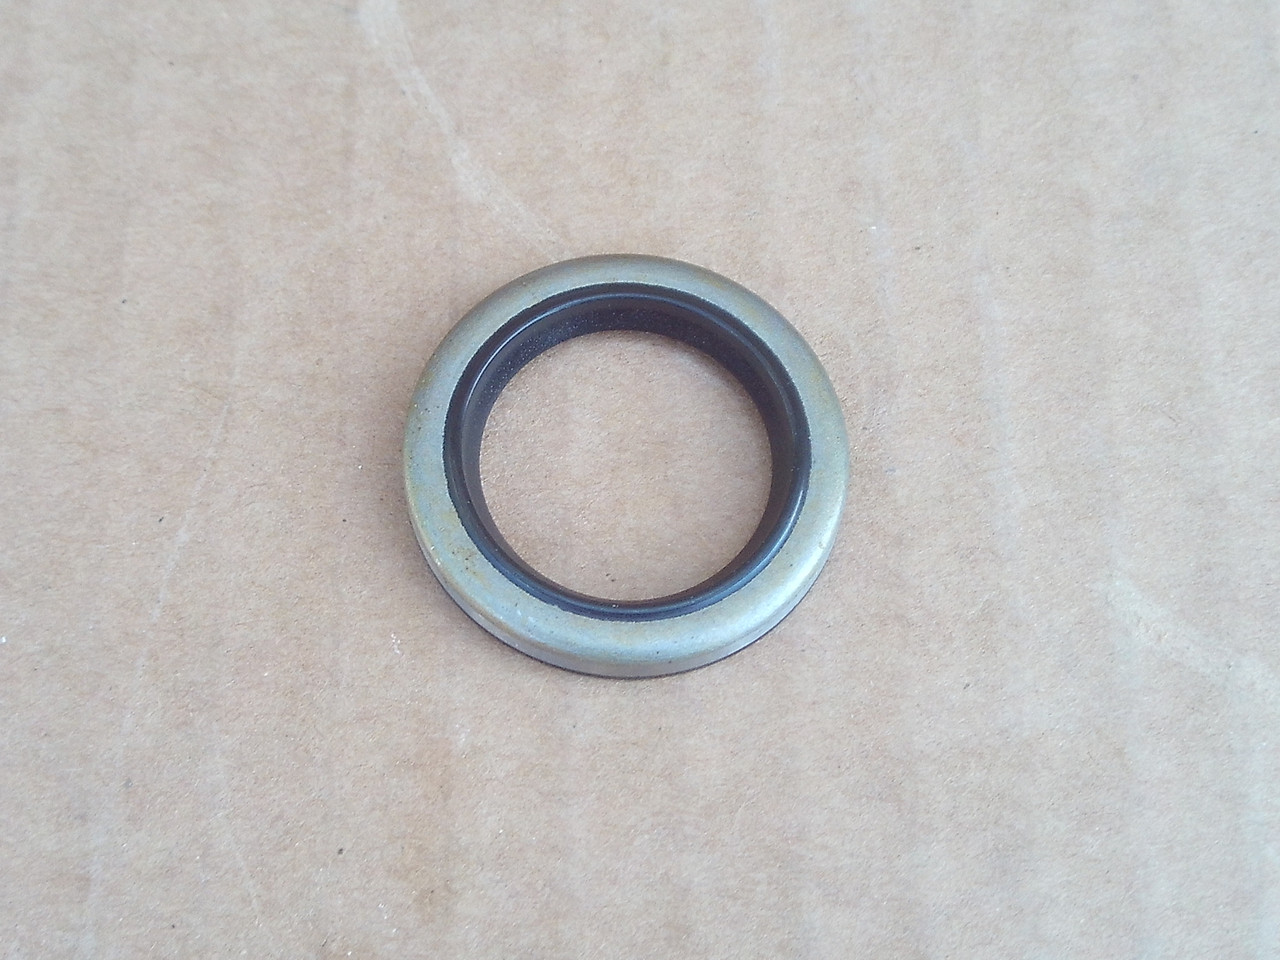 Crankshaft Oil Seal for Briggs and Stratton 299819, 299819S, 4116, 89660 &